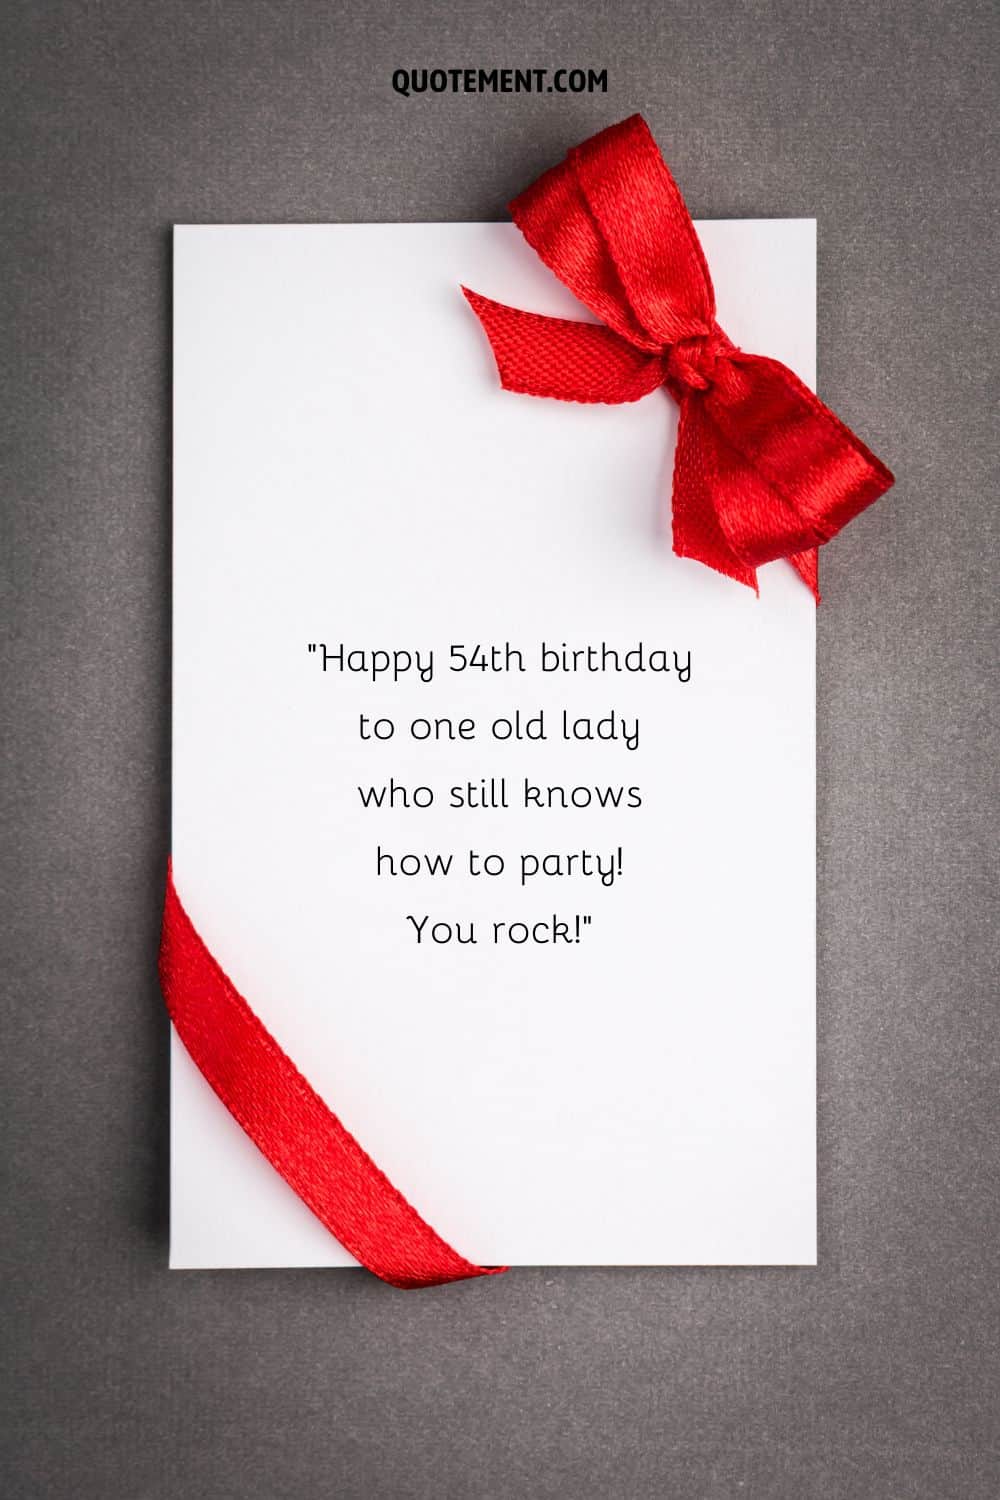 Hilarious message for their 54th birthday on a white birthday card with a red ribbon
